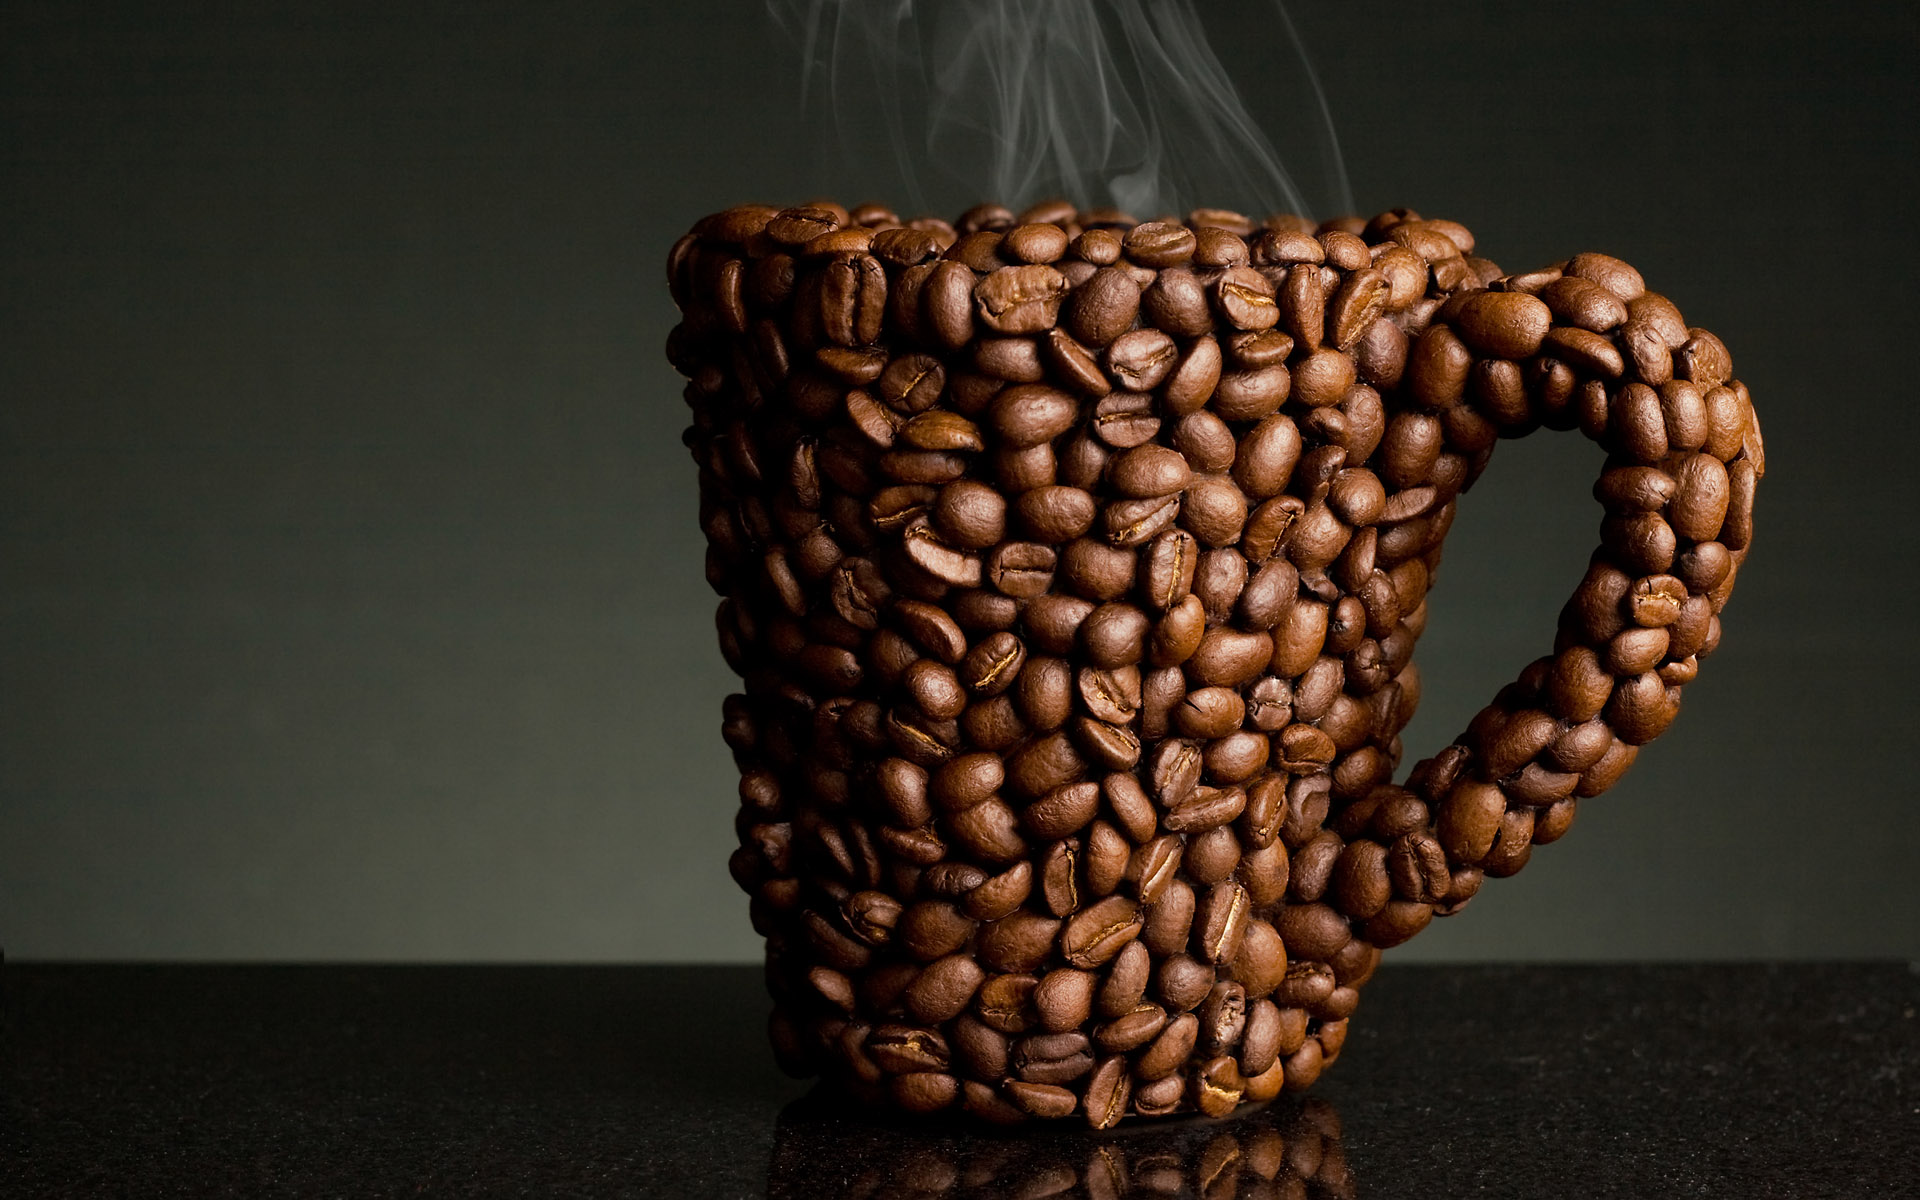 Coffee Hd Wallpapers Coffee Cup Hd Wallpapers Coffee Beans 1920x1200